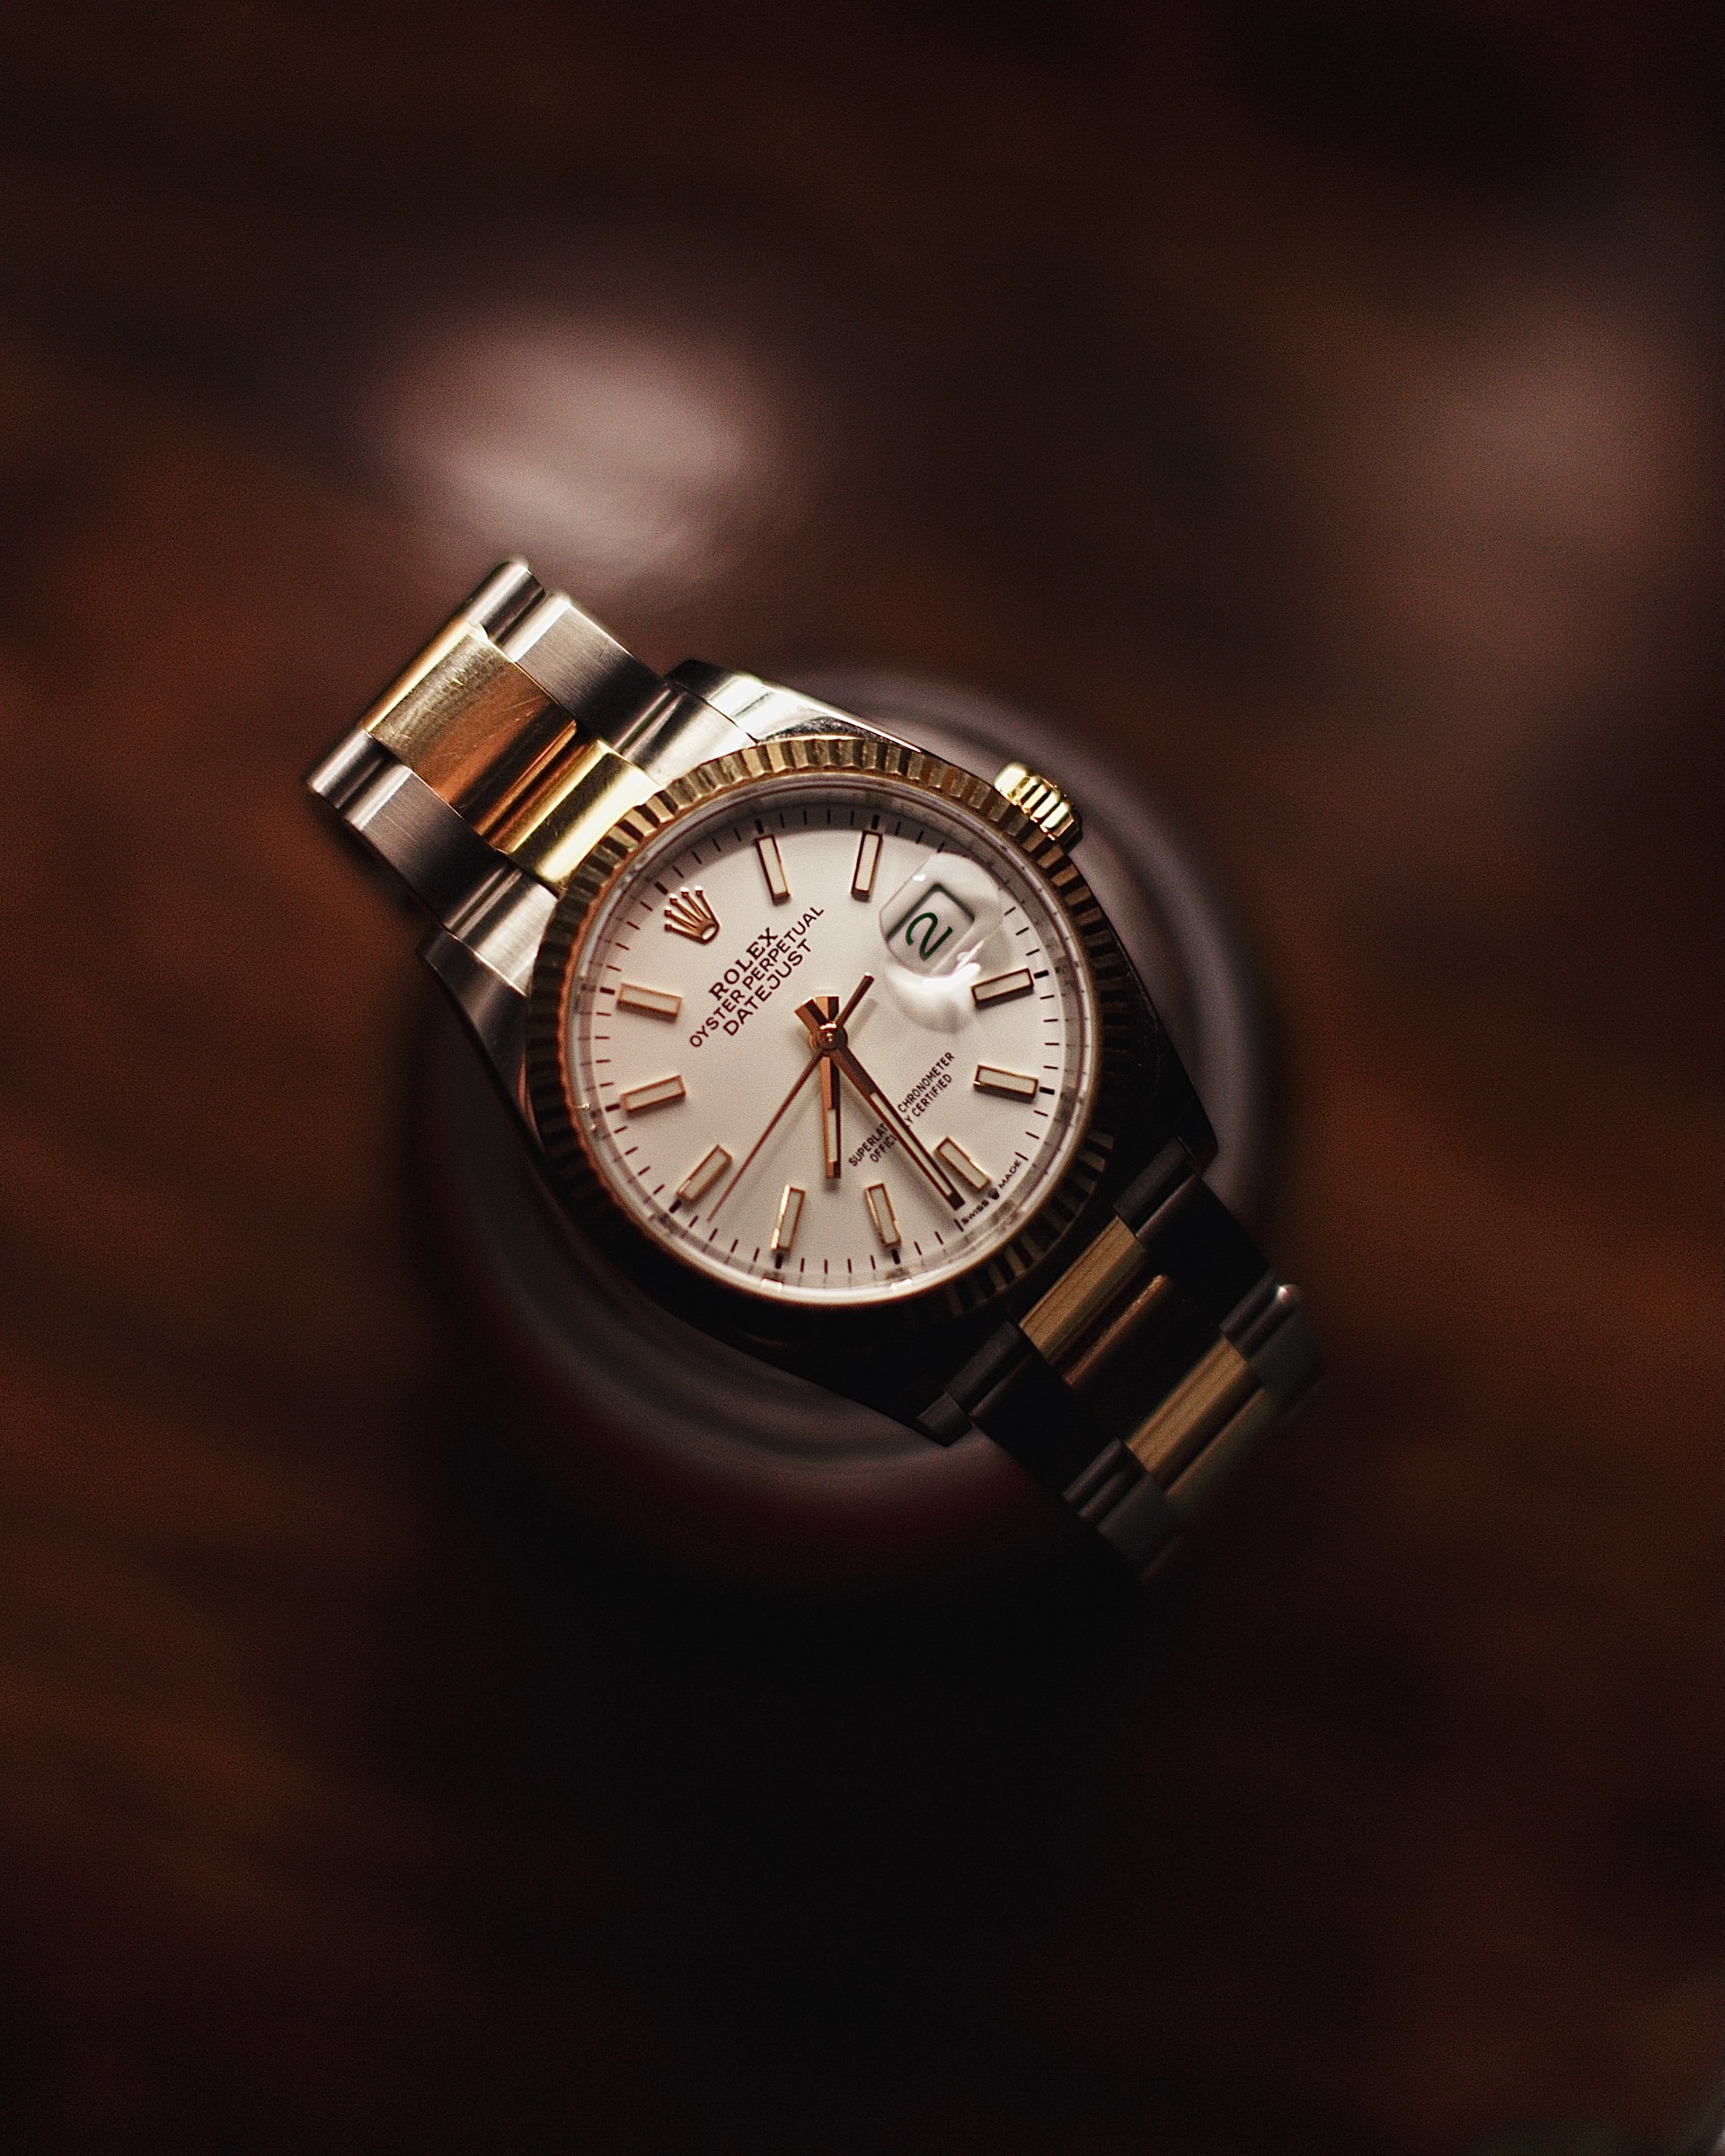 Sponsored: Turn Your Watch Collection into a Revolving Line of Credit